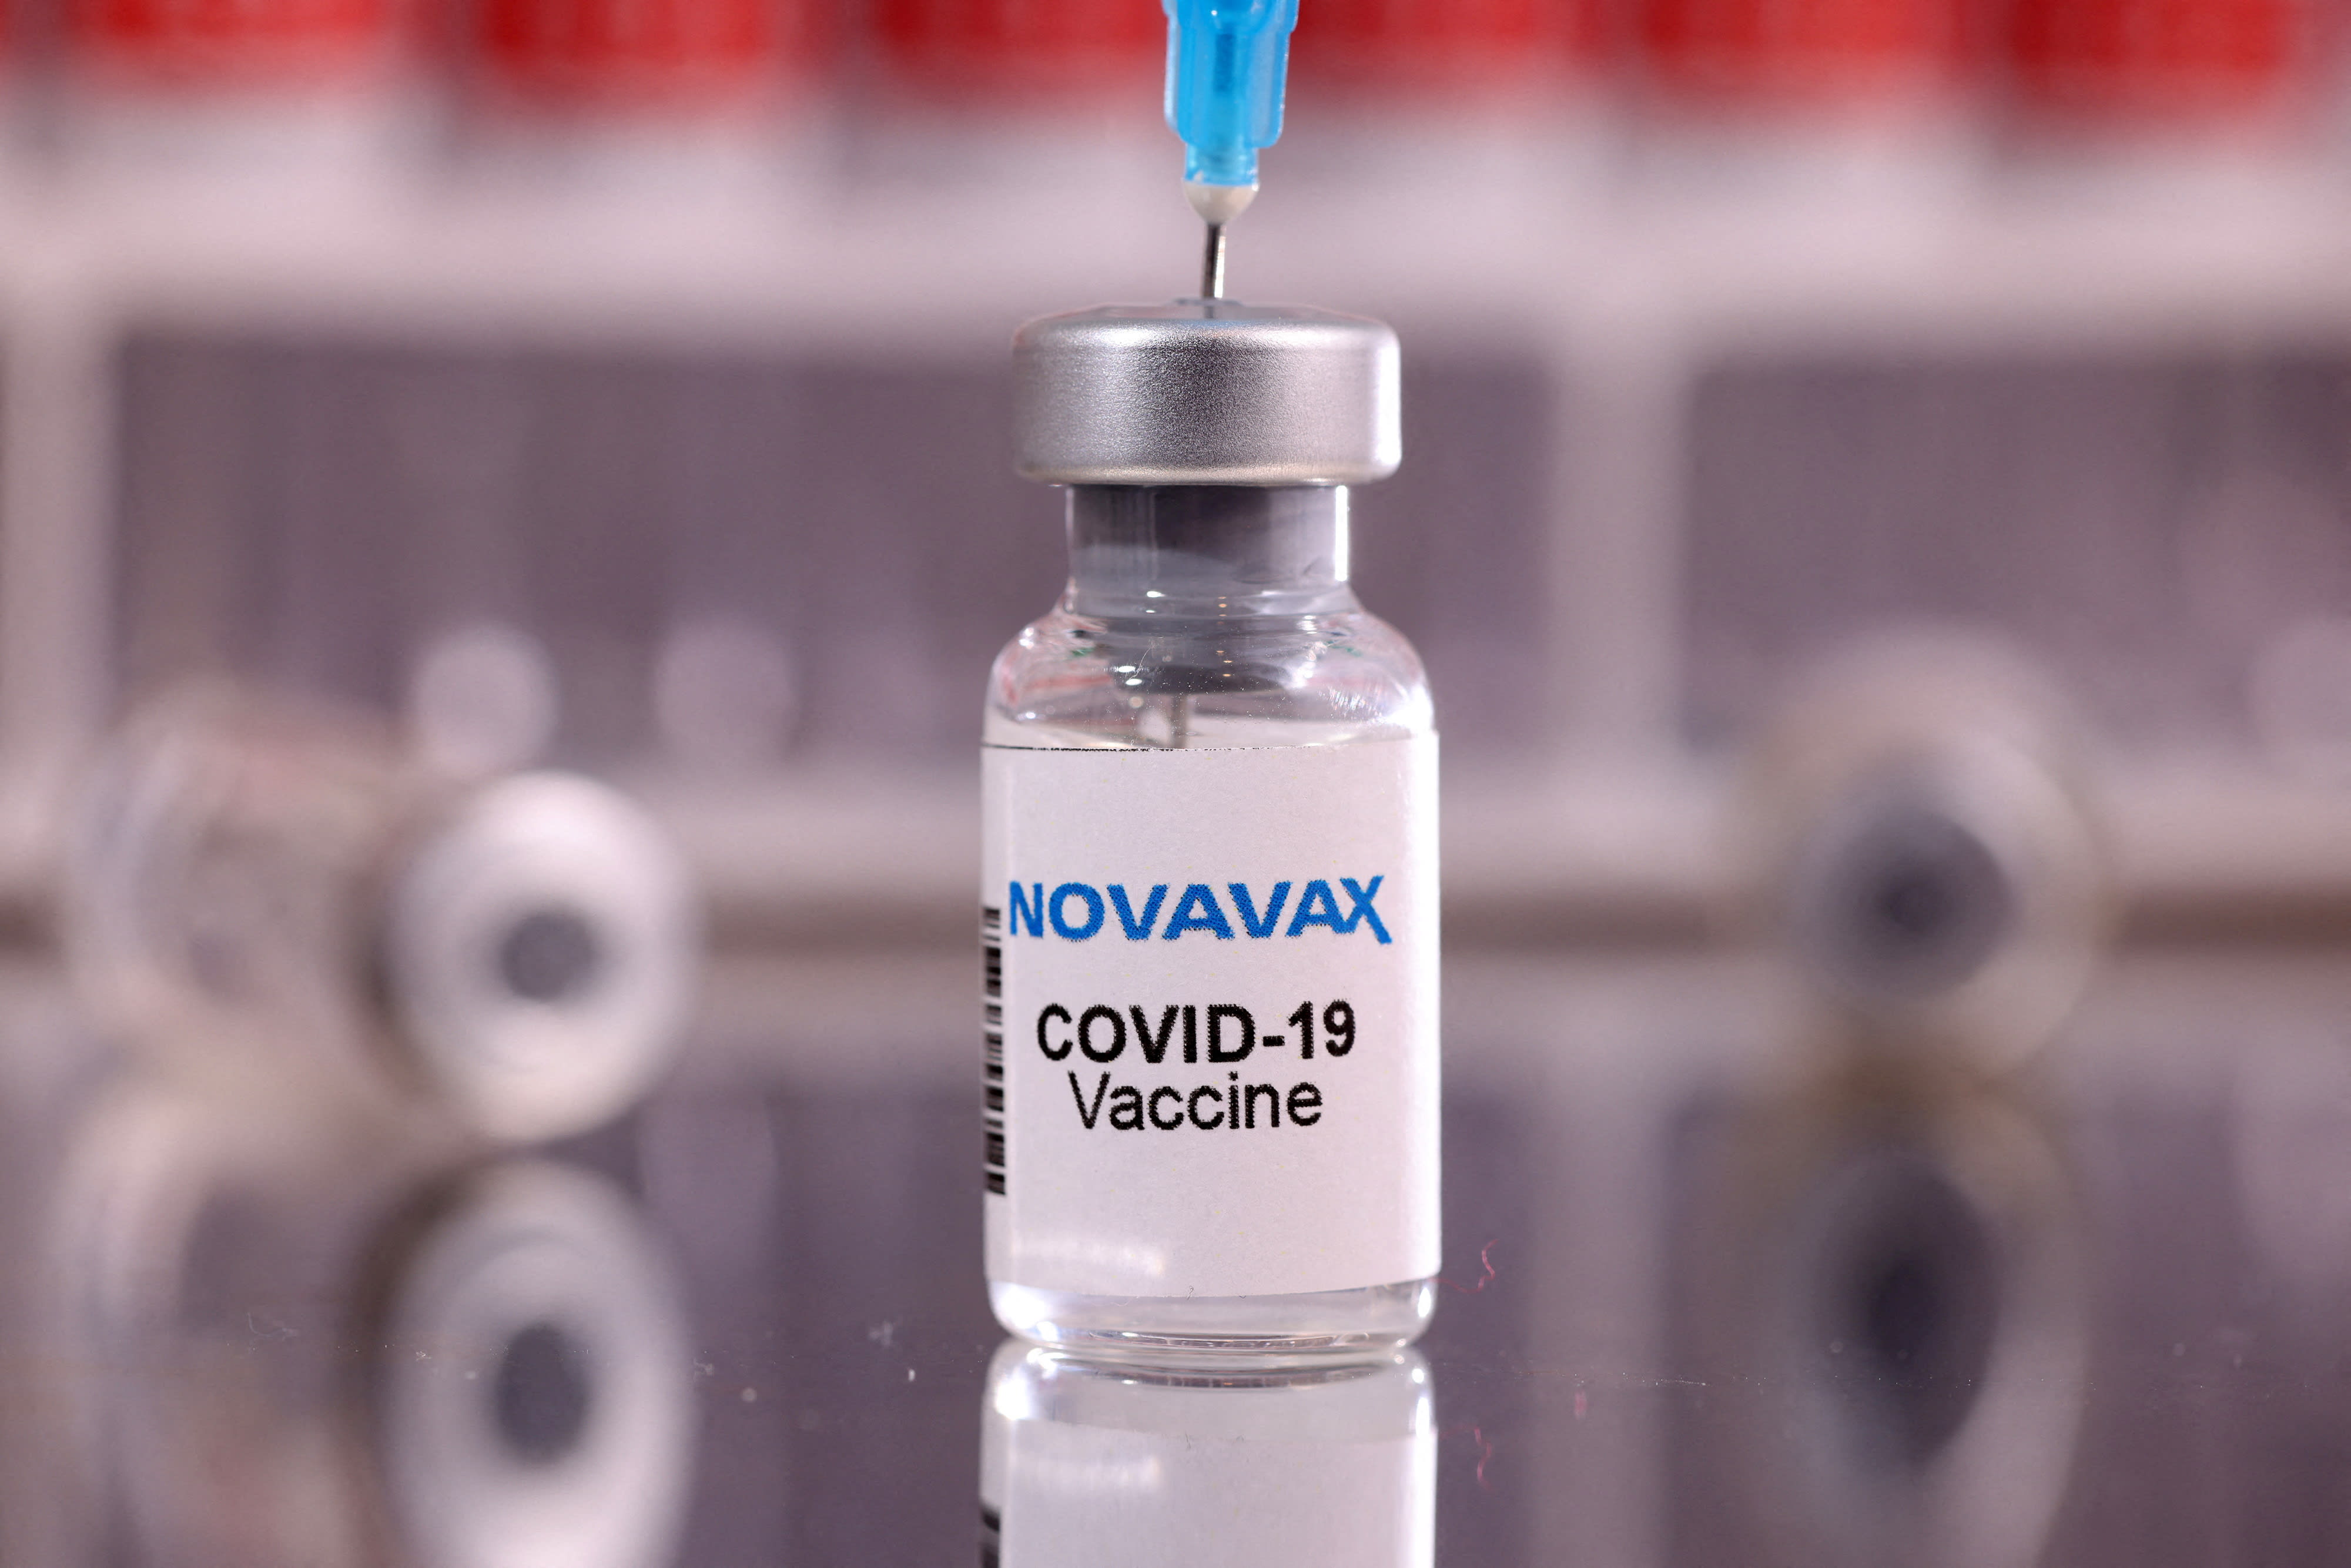 The Nuvaxovid vaccine by American company Novavax uses a long-established protein-based technology.